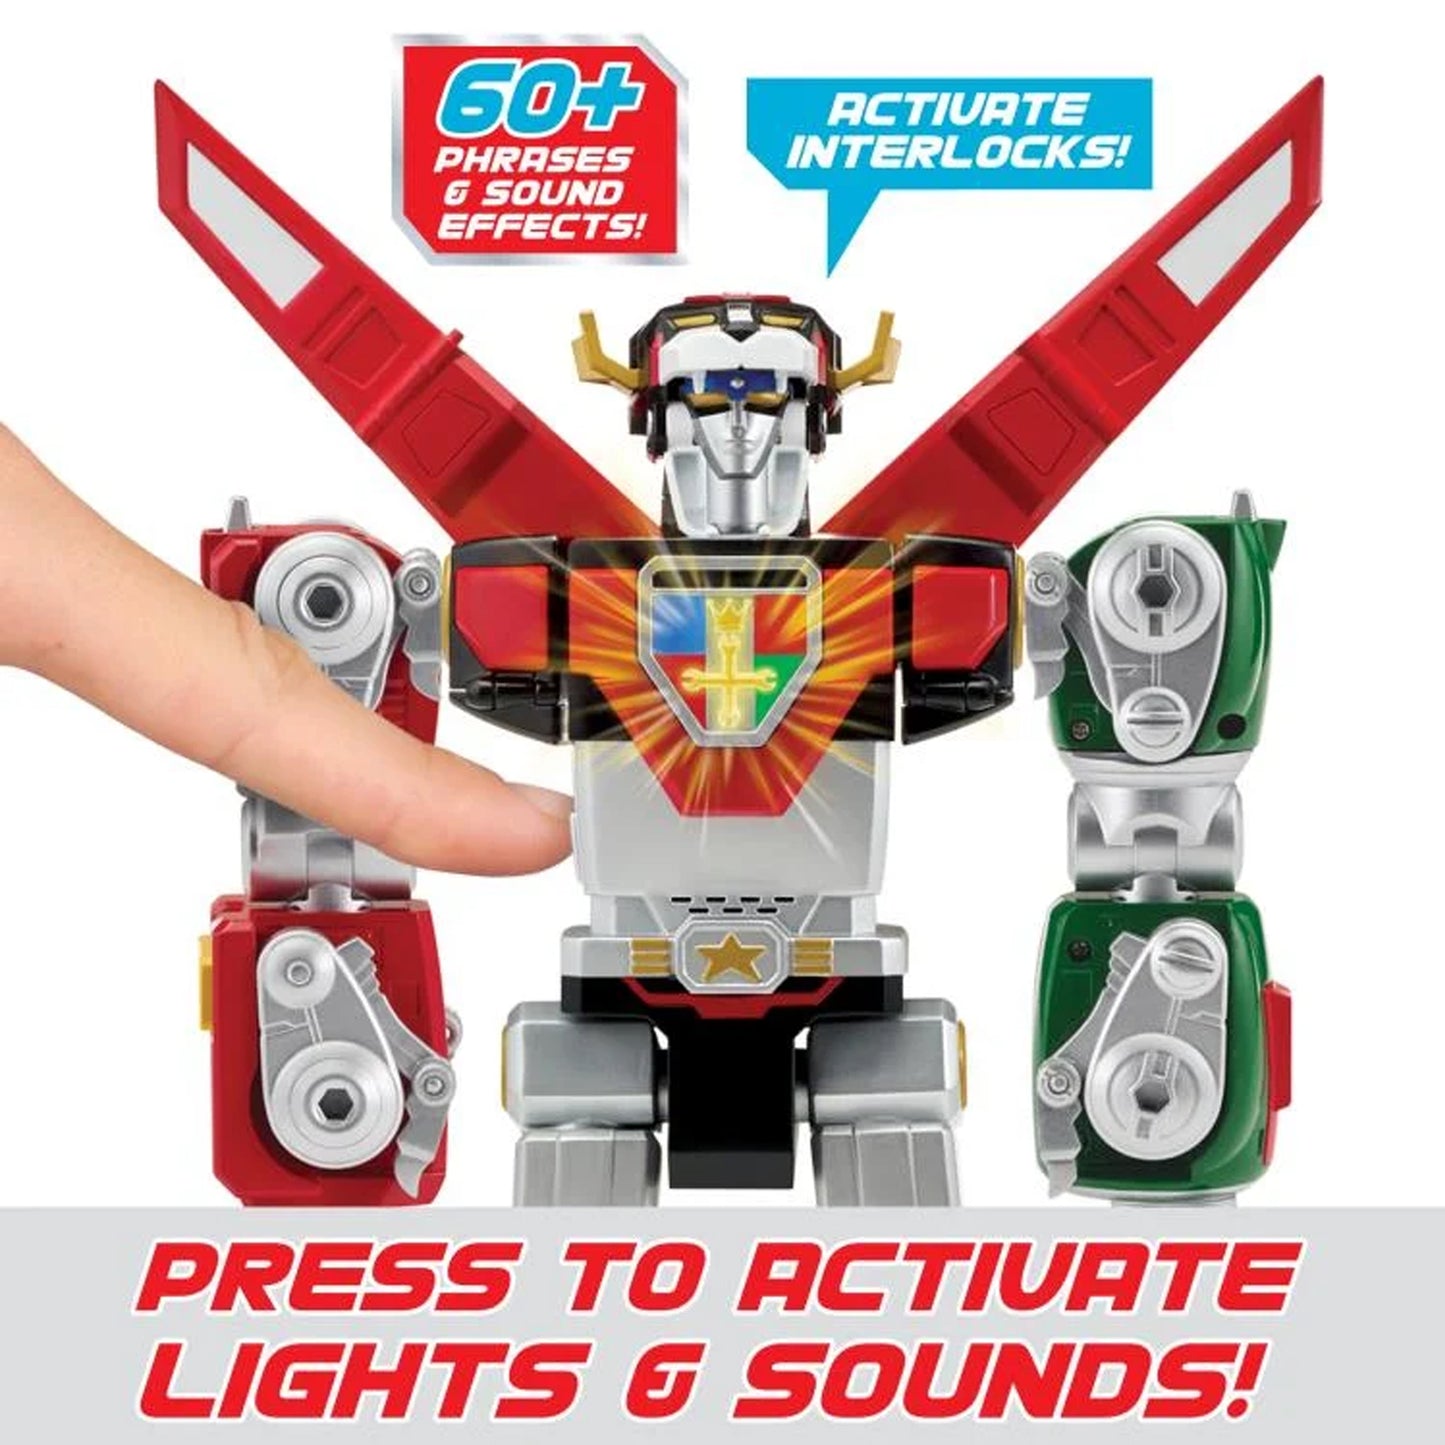 Playmates Defender of the Universe 40th Anniversary Classic Legendary Voltron